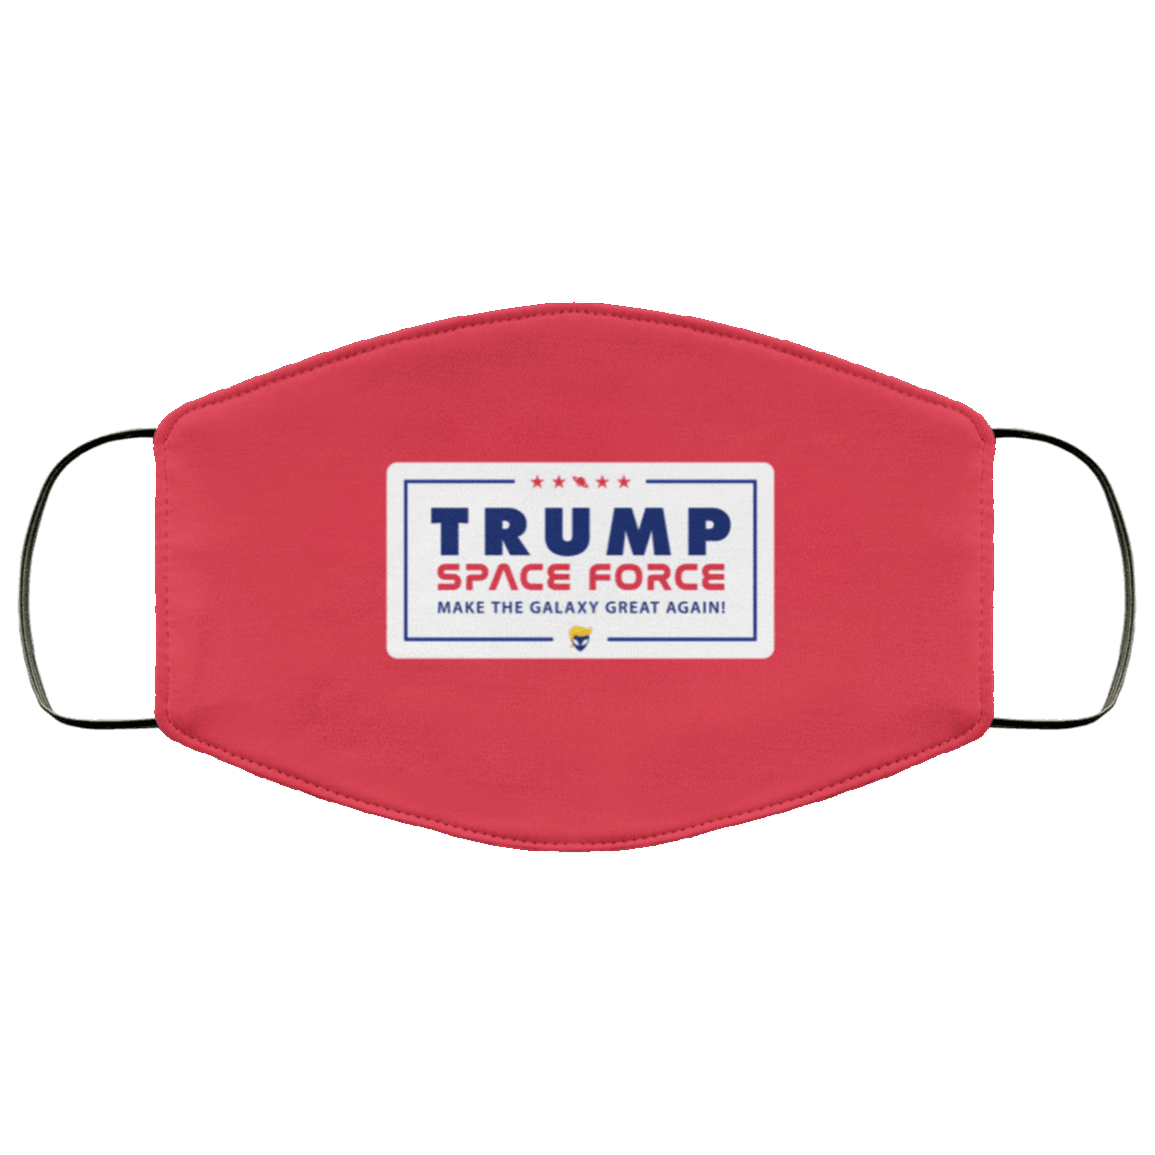 Designs by MyUtopia Shout Out:Space Force Make Galaxy Great Again Trump Humor Adult Fabric Face Mask with Elastic Ear Loops,3 Layer Fabric Face Mask / Red / Adult,Fabric Face Mask